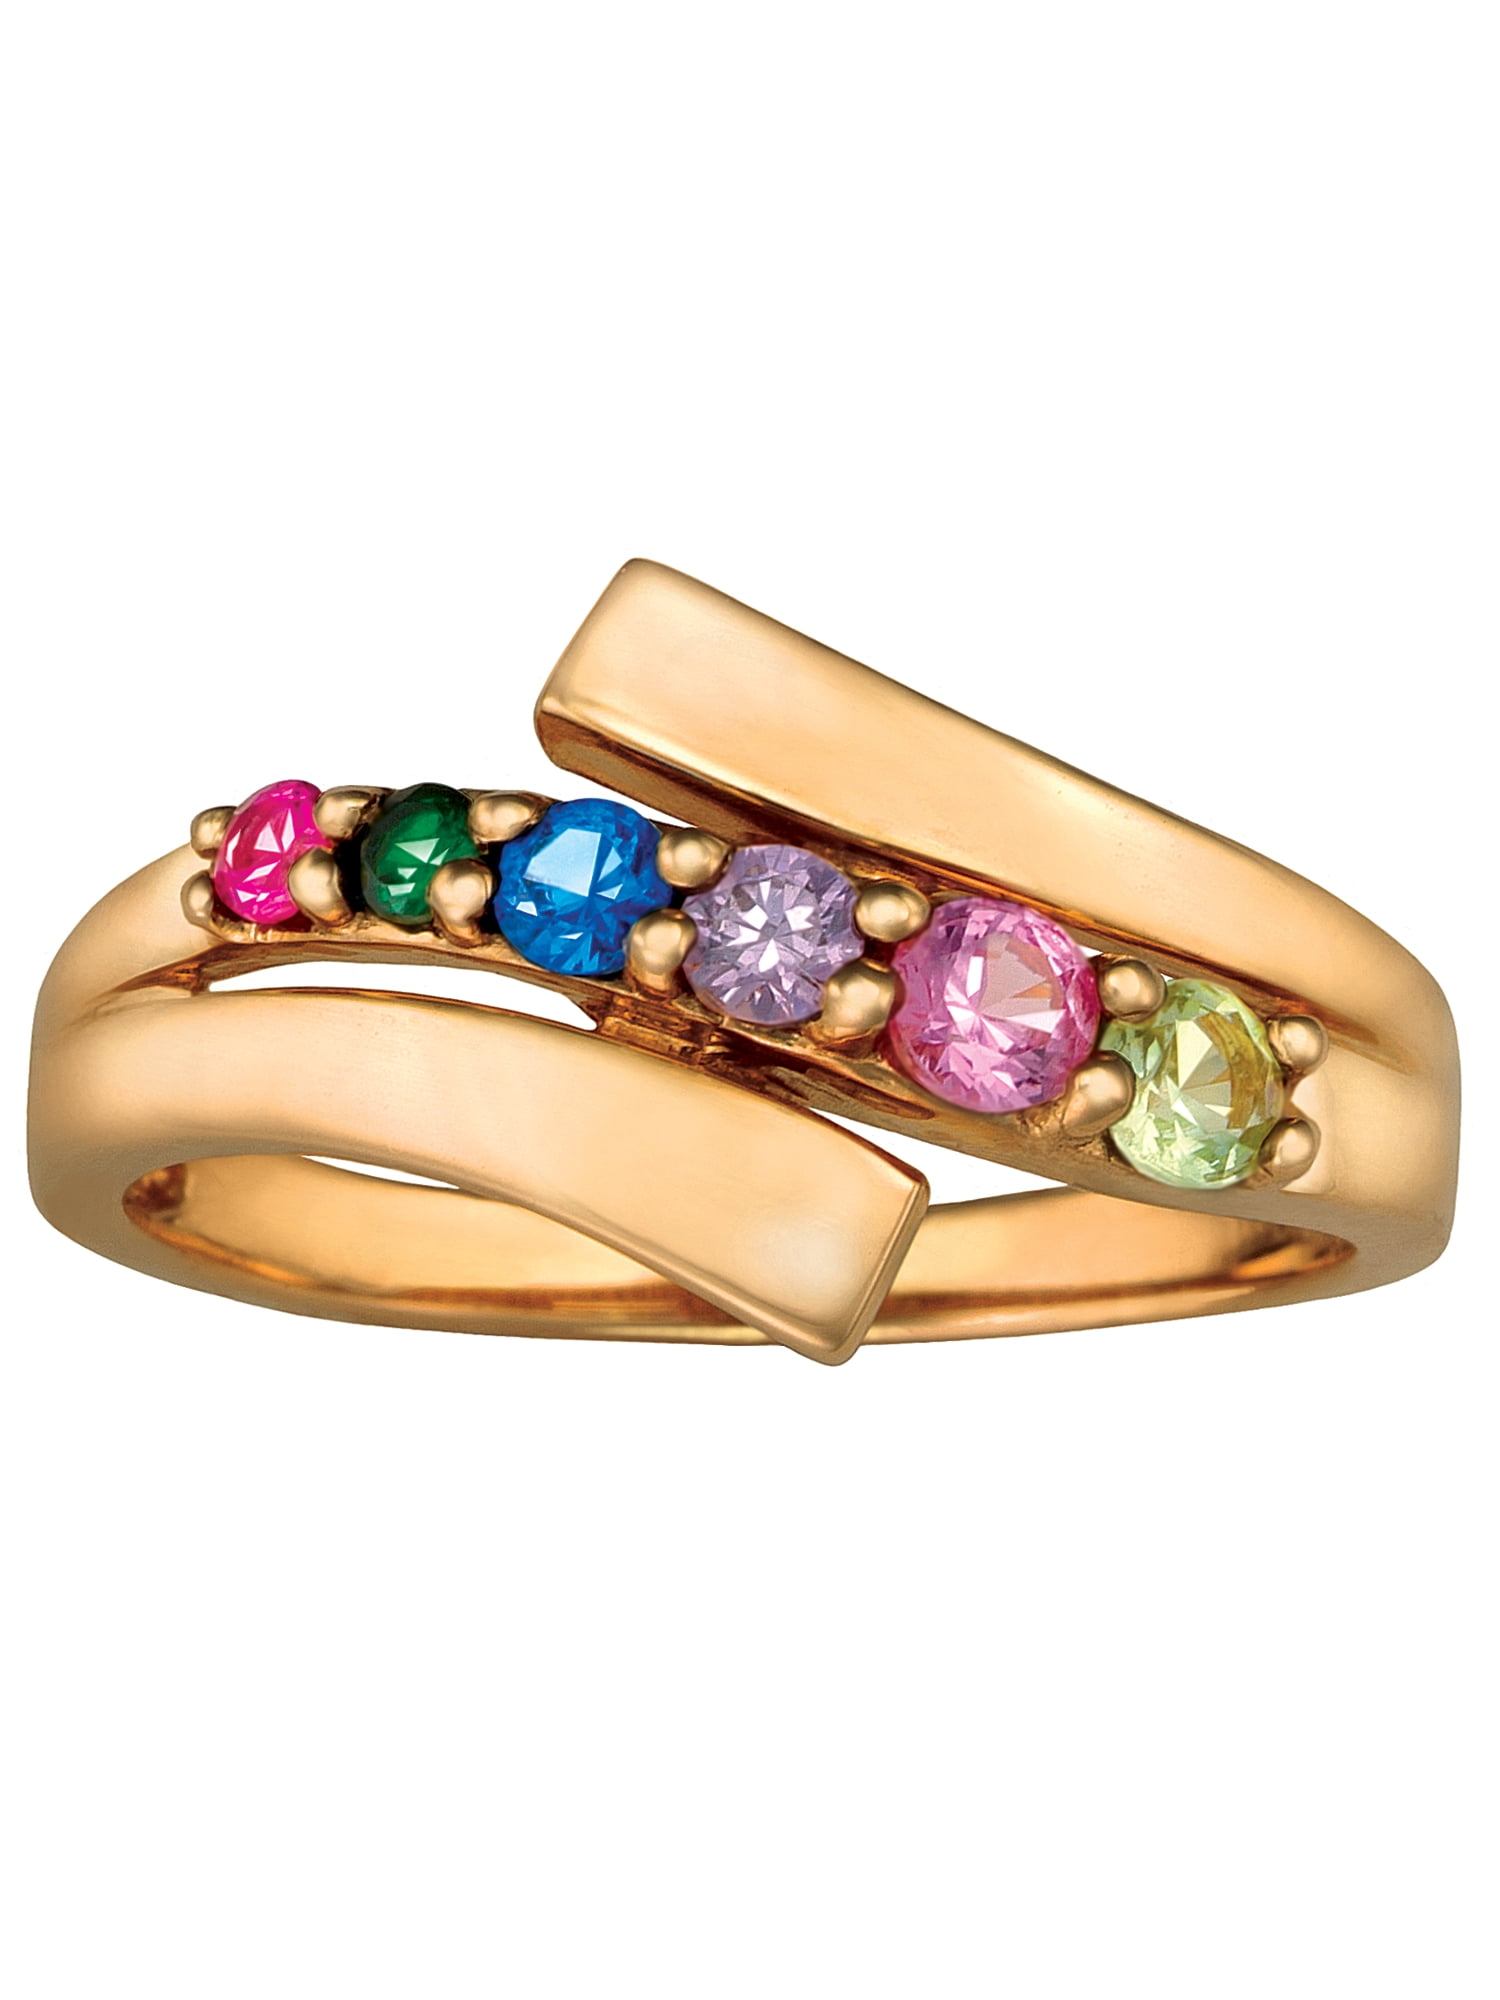 Keepsake Personalized Family Jewelry Lineage Mother's Birthstone Ring available in 10k and 14k